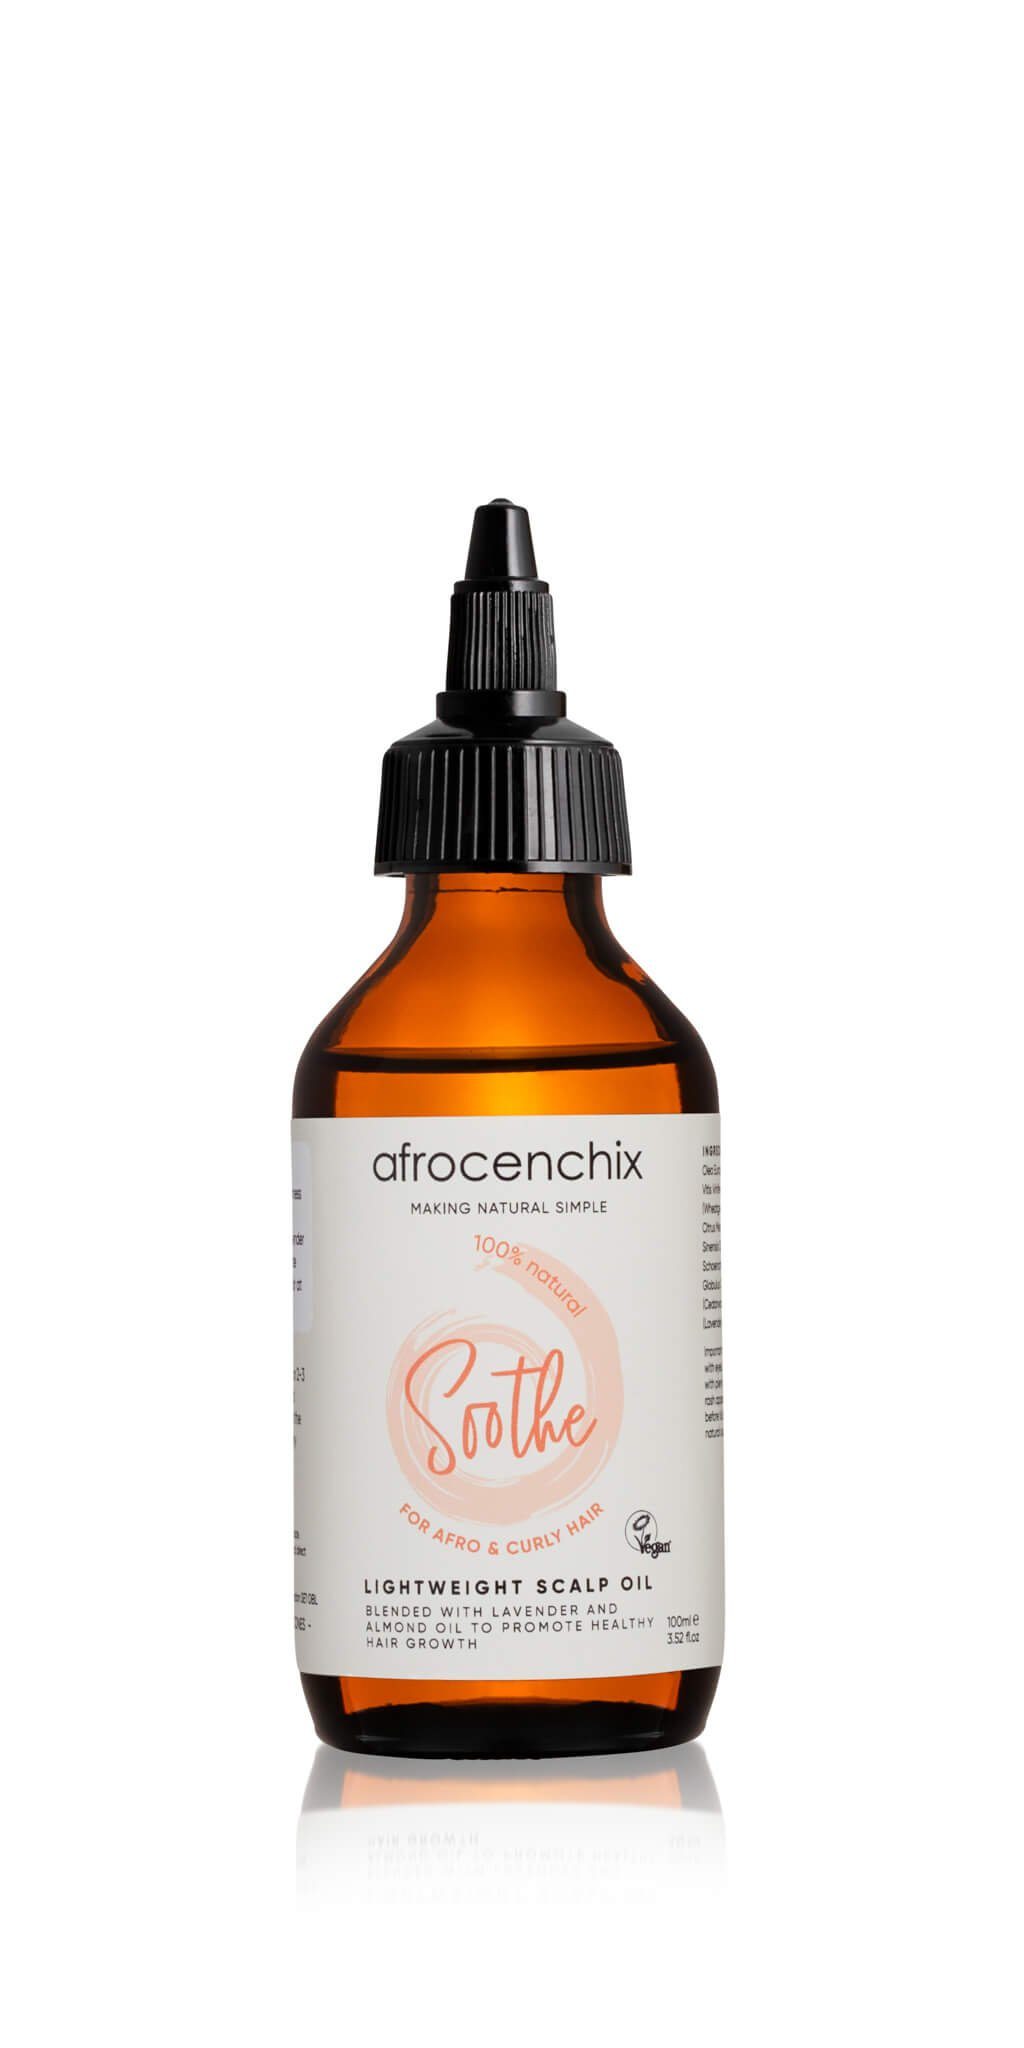 Afrocenchix Soothe Scalp Oil